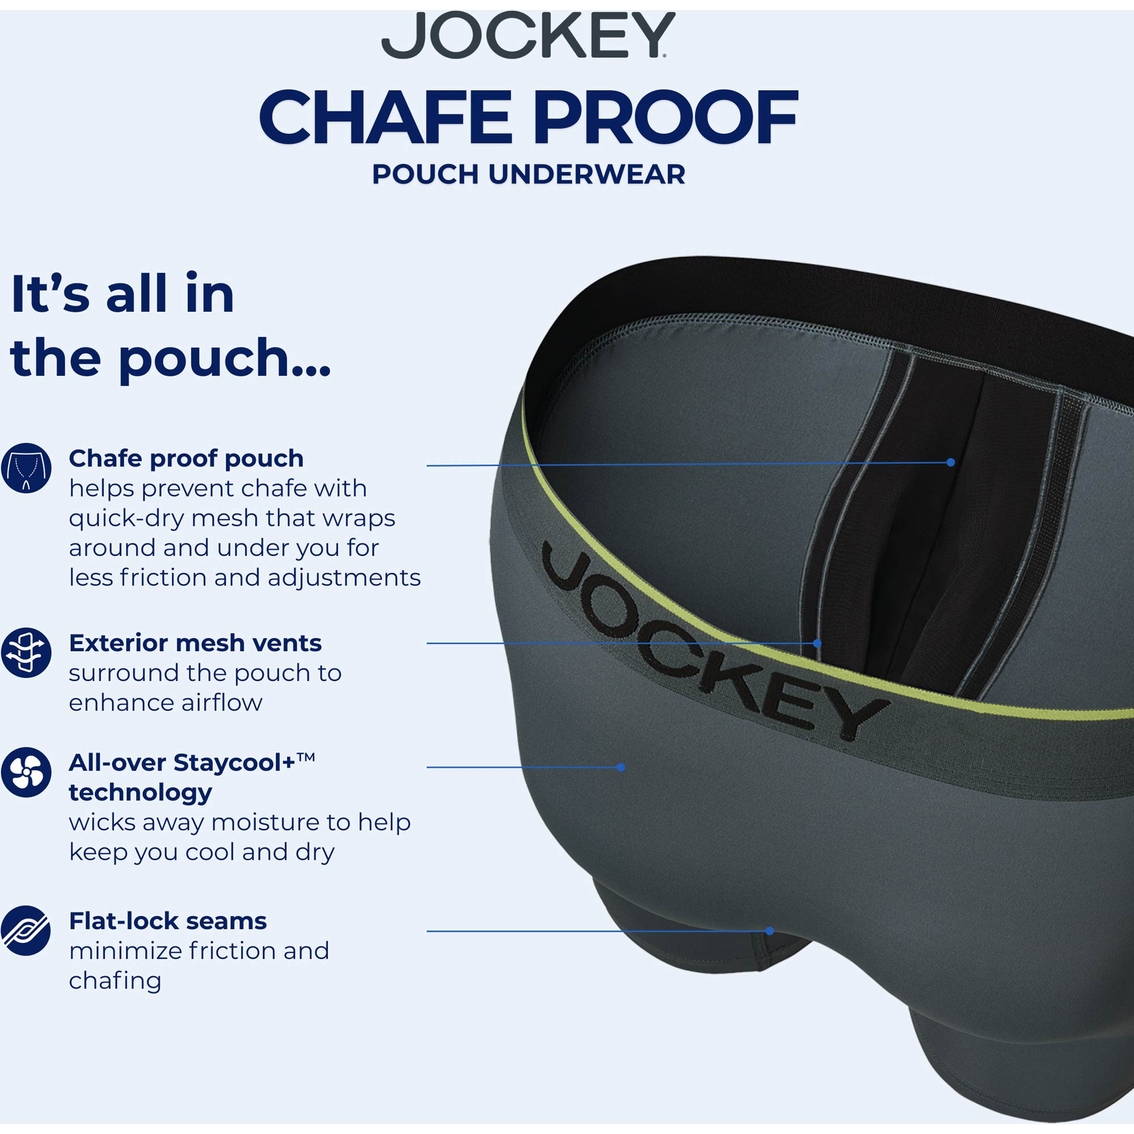 Jockey Chafe Proof Cotton Boxer Briefs - Image 5 of 7